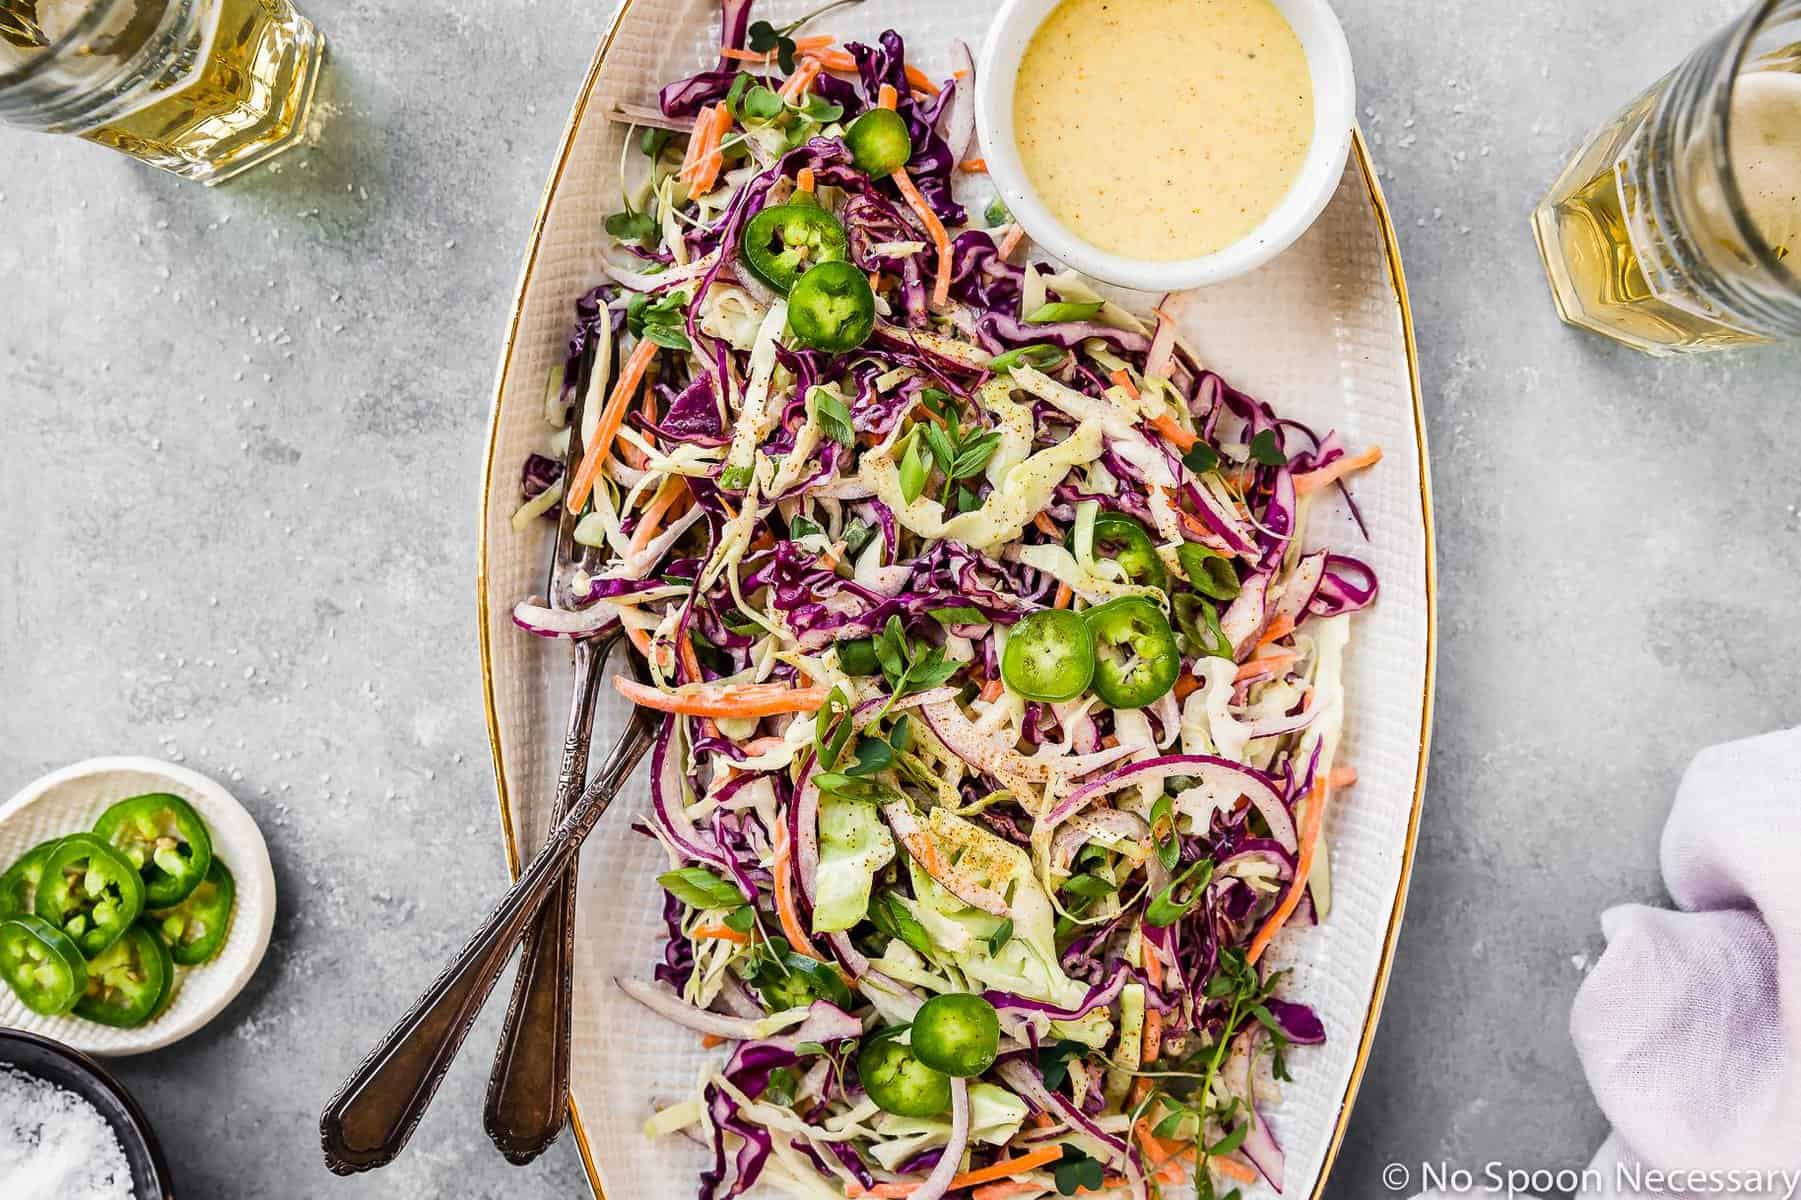  Get your daily dose of vegetables with this delicious slaw.